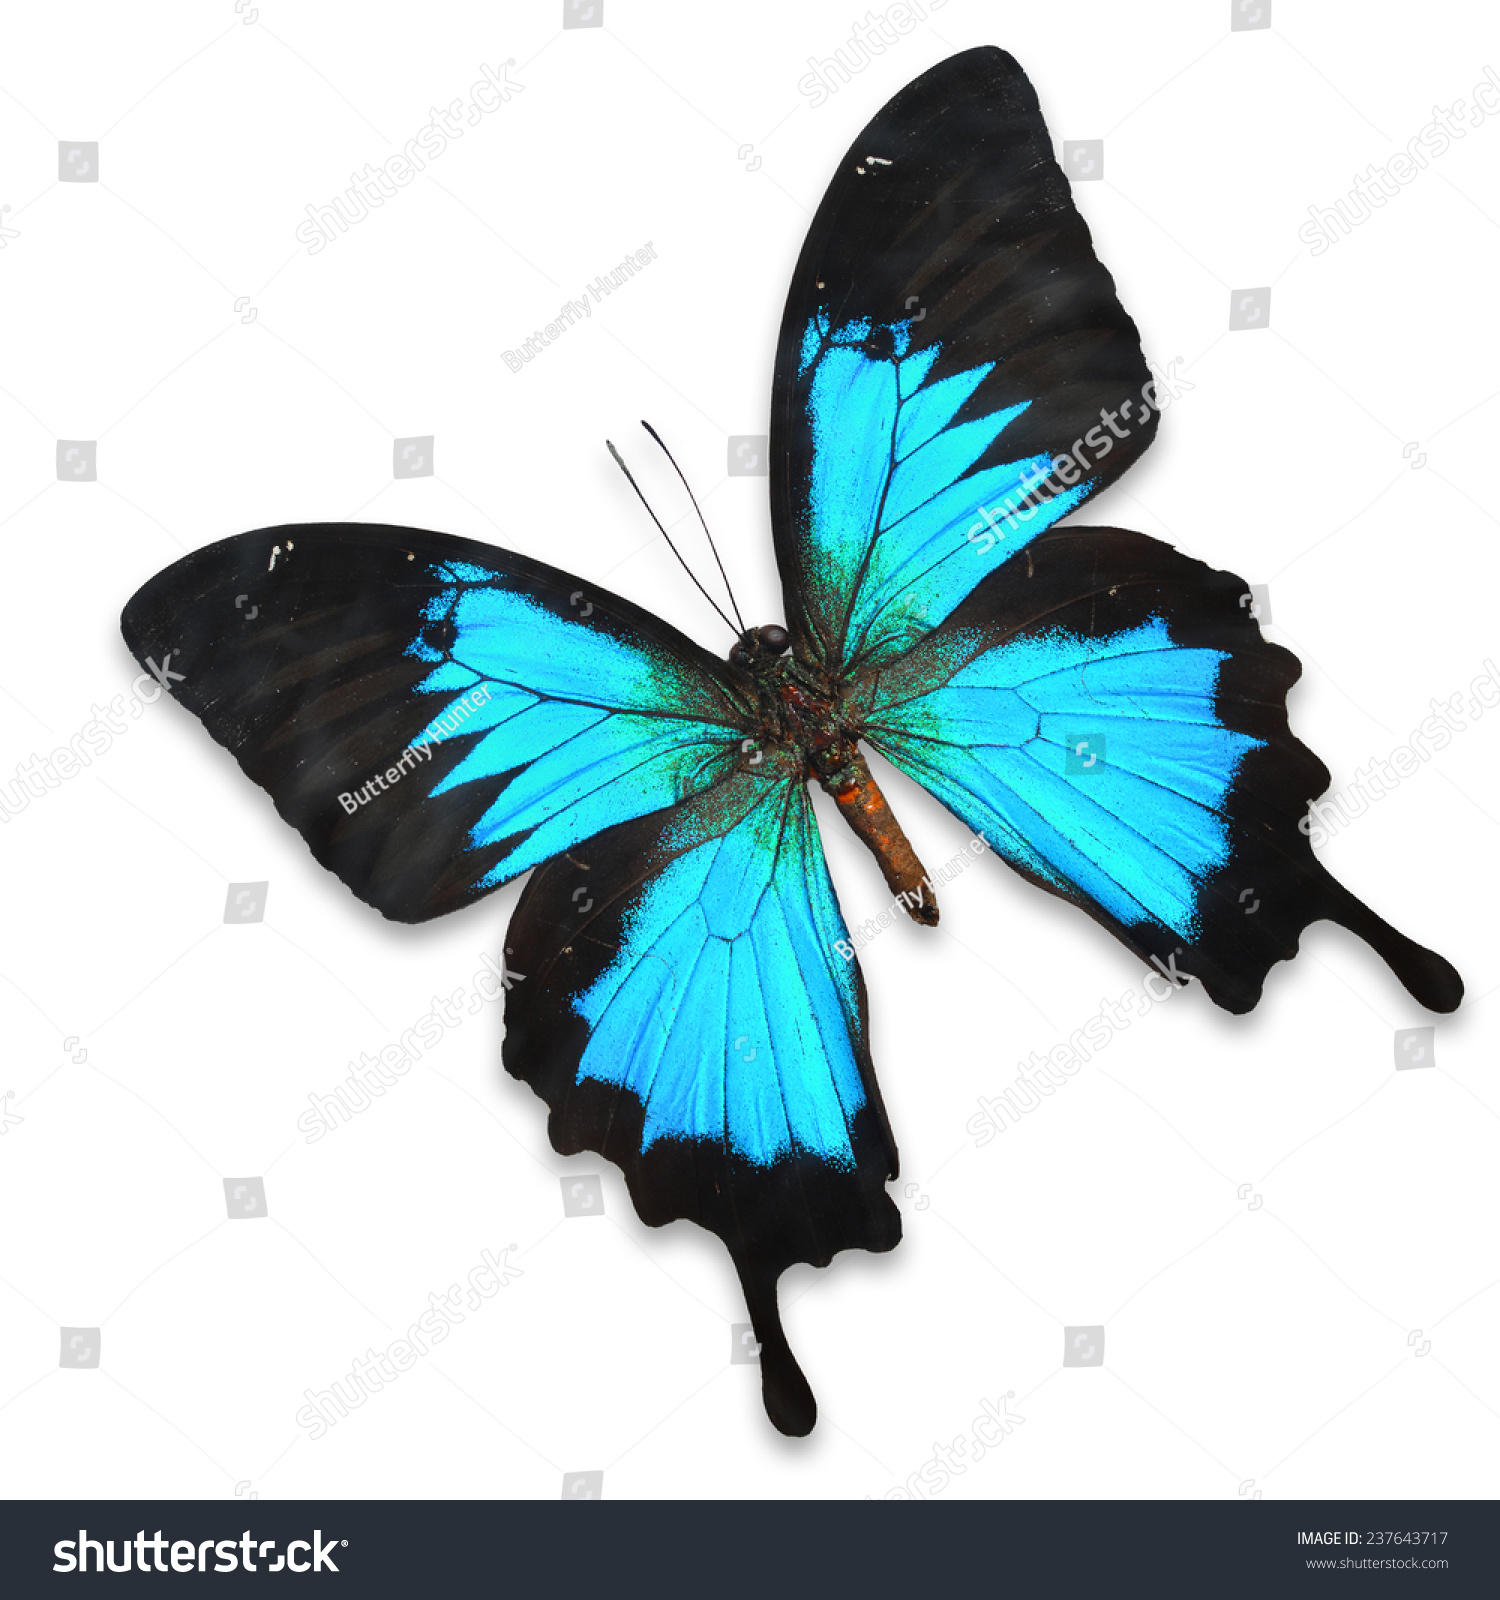 Blue Butterfly Swallowtail Species Papilio Ulysses Stock Photo ...